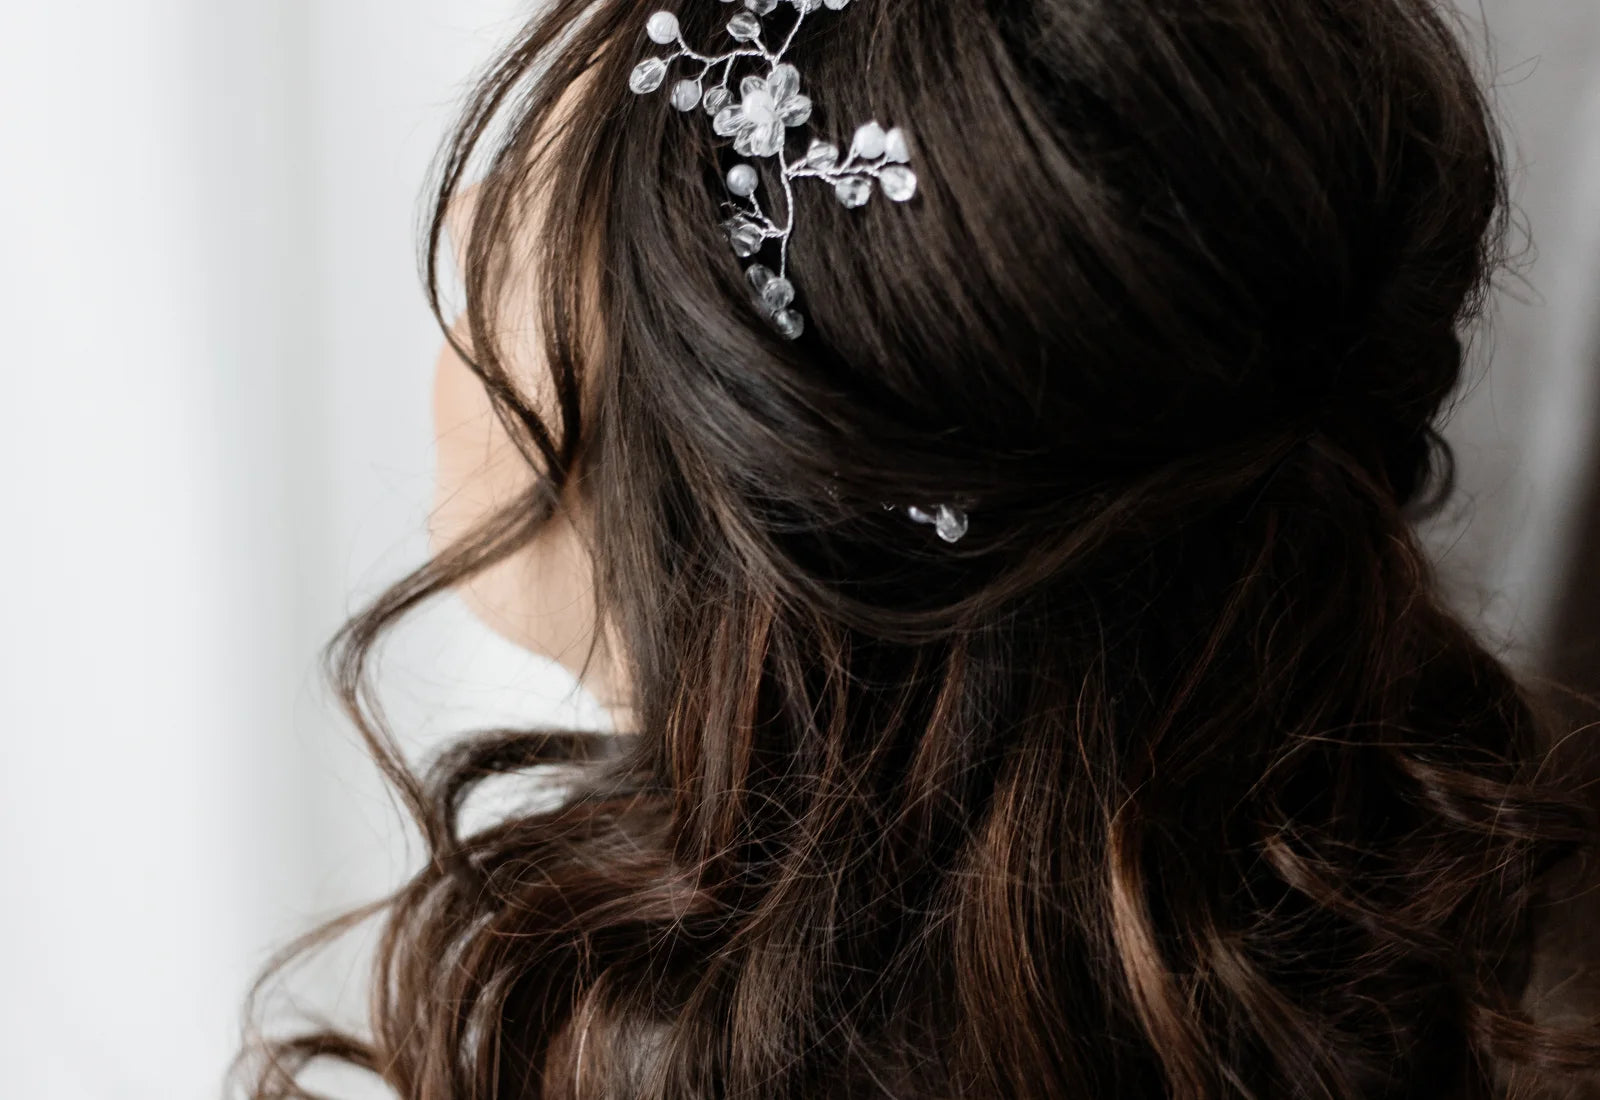 The classic: wedding down hairstyles for long hair